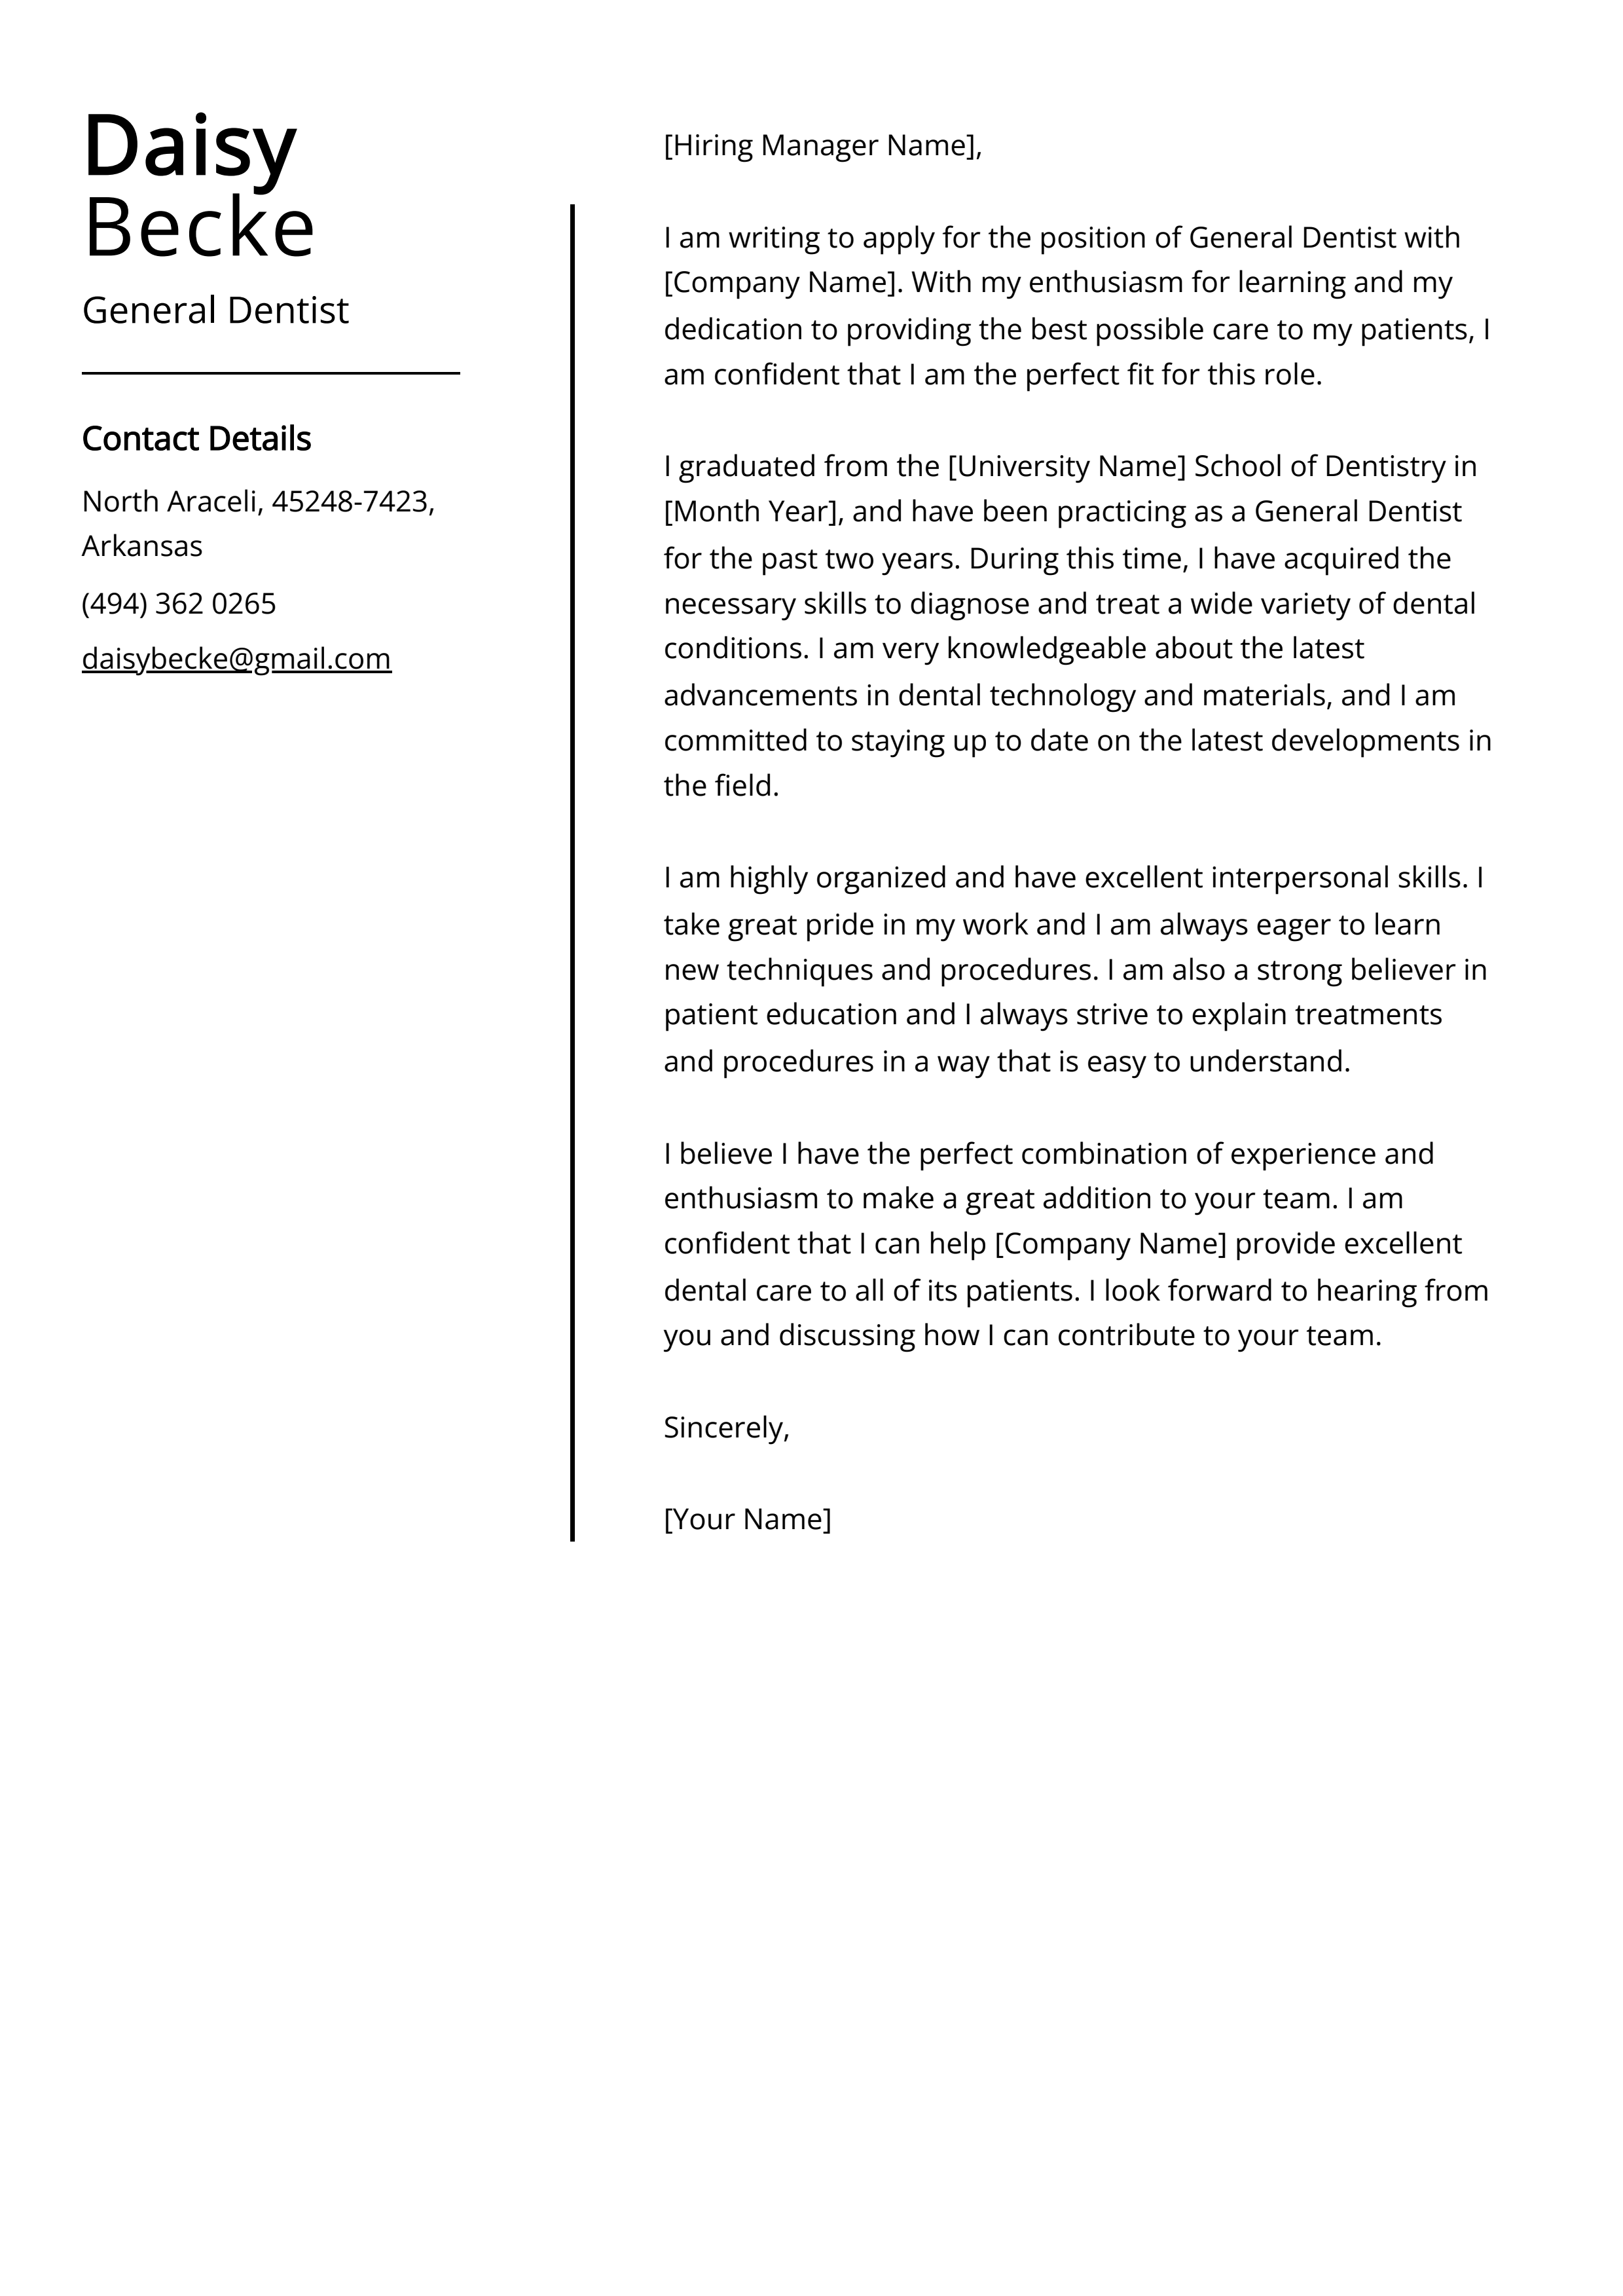 General Dentist Cover Letter Example